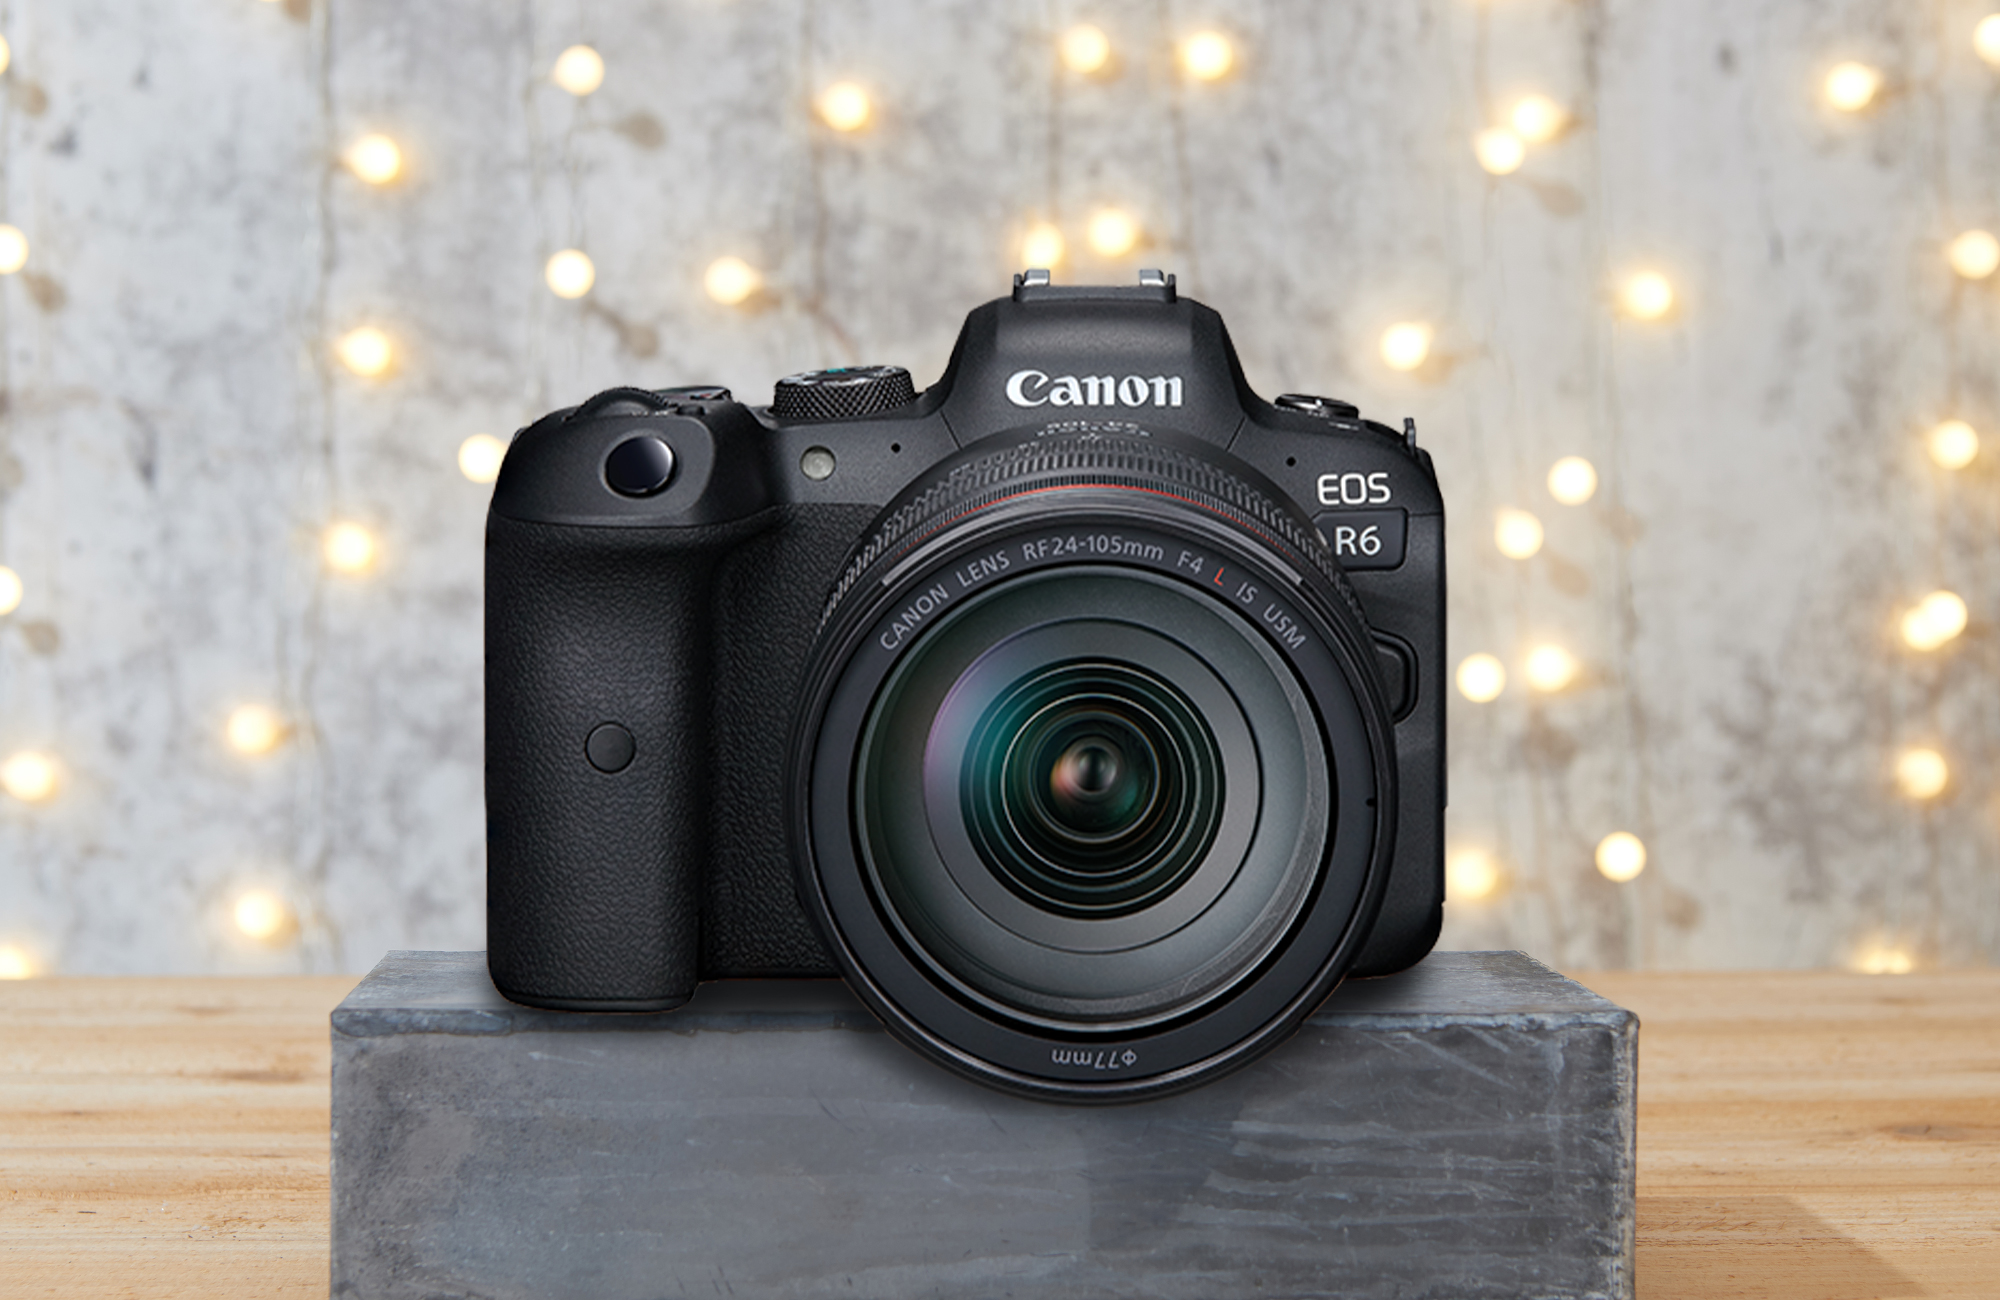 Canon EOS R6 for the Engadget 2021 Holiday Gift Guide.
